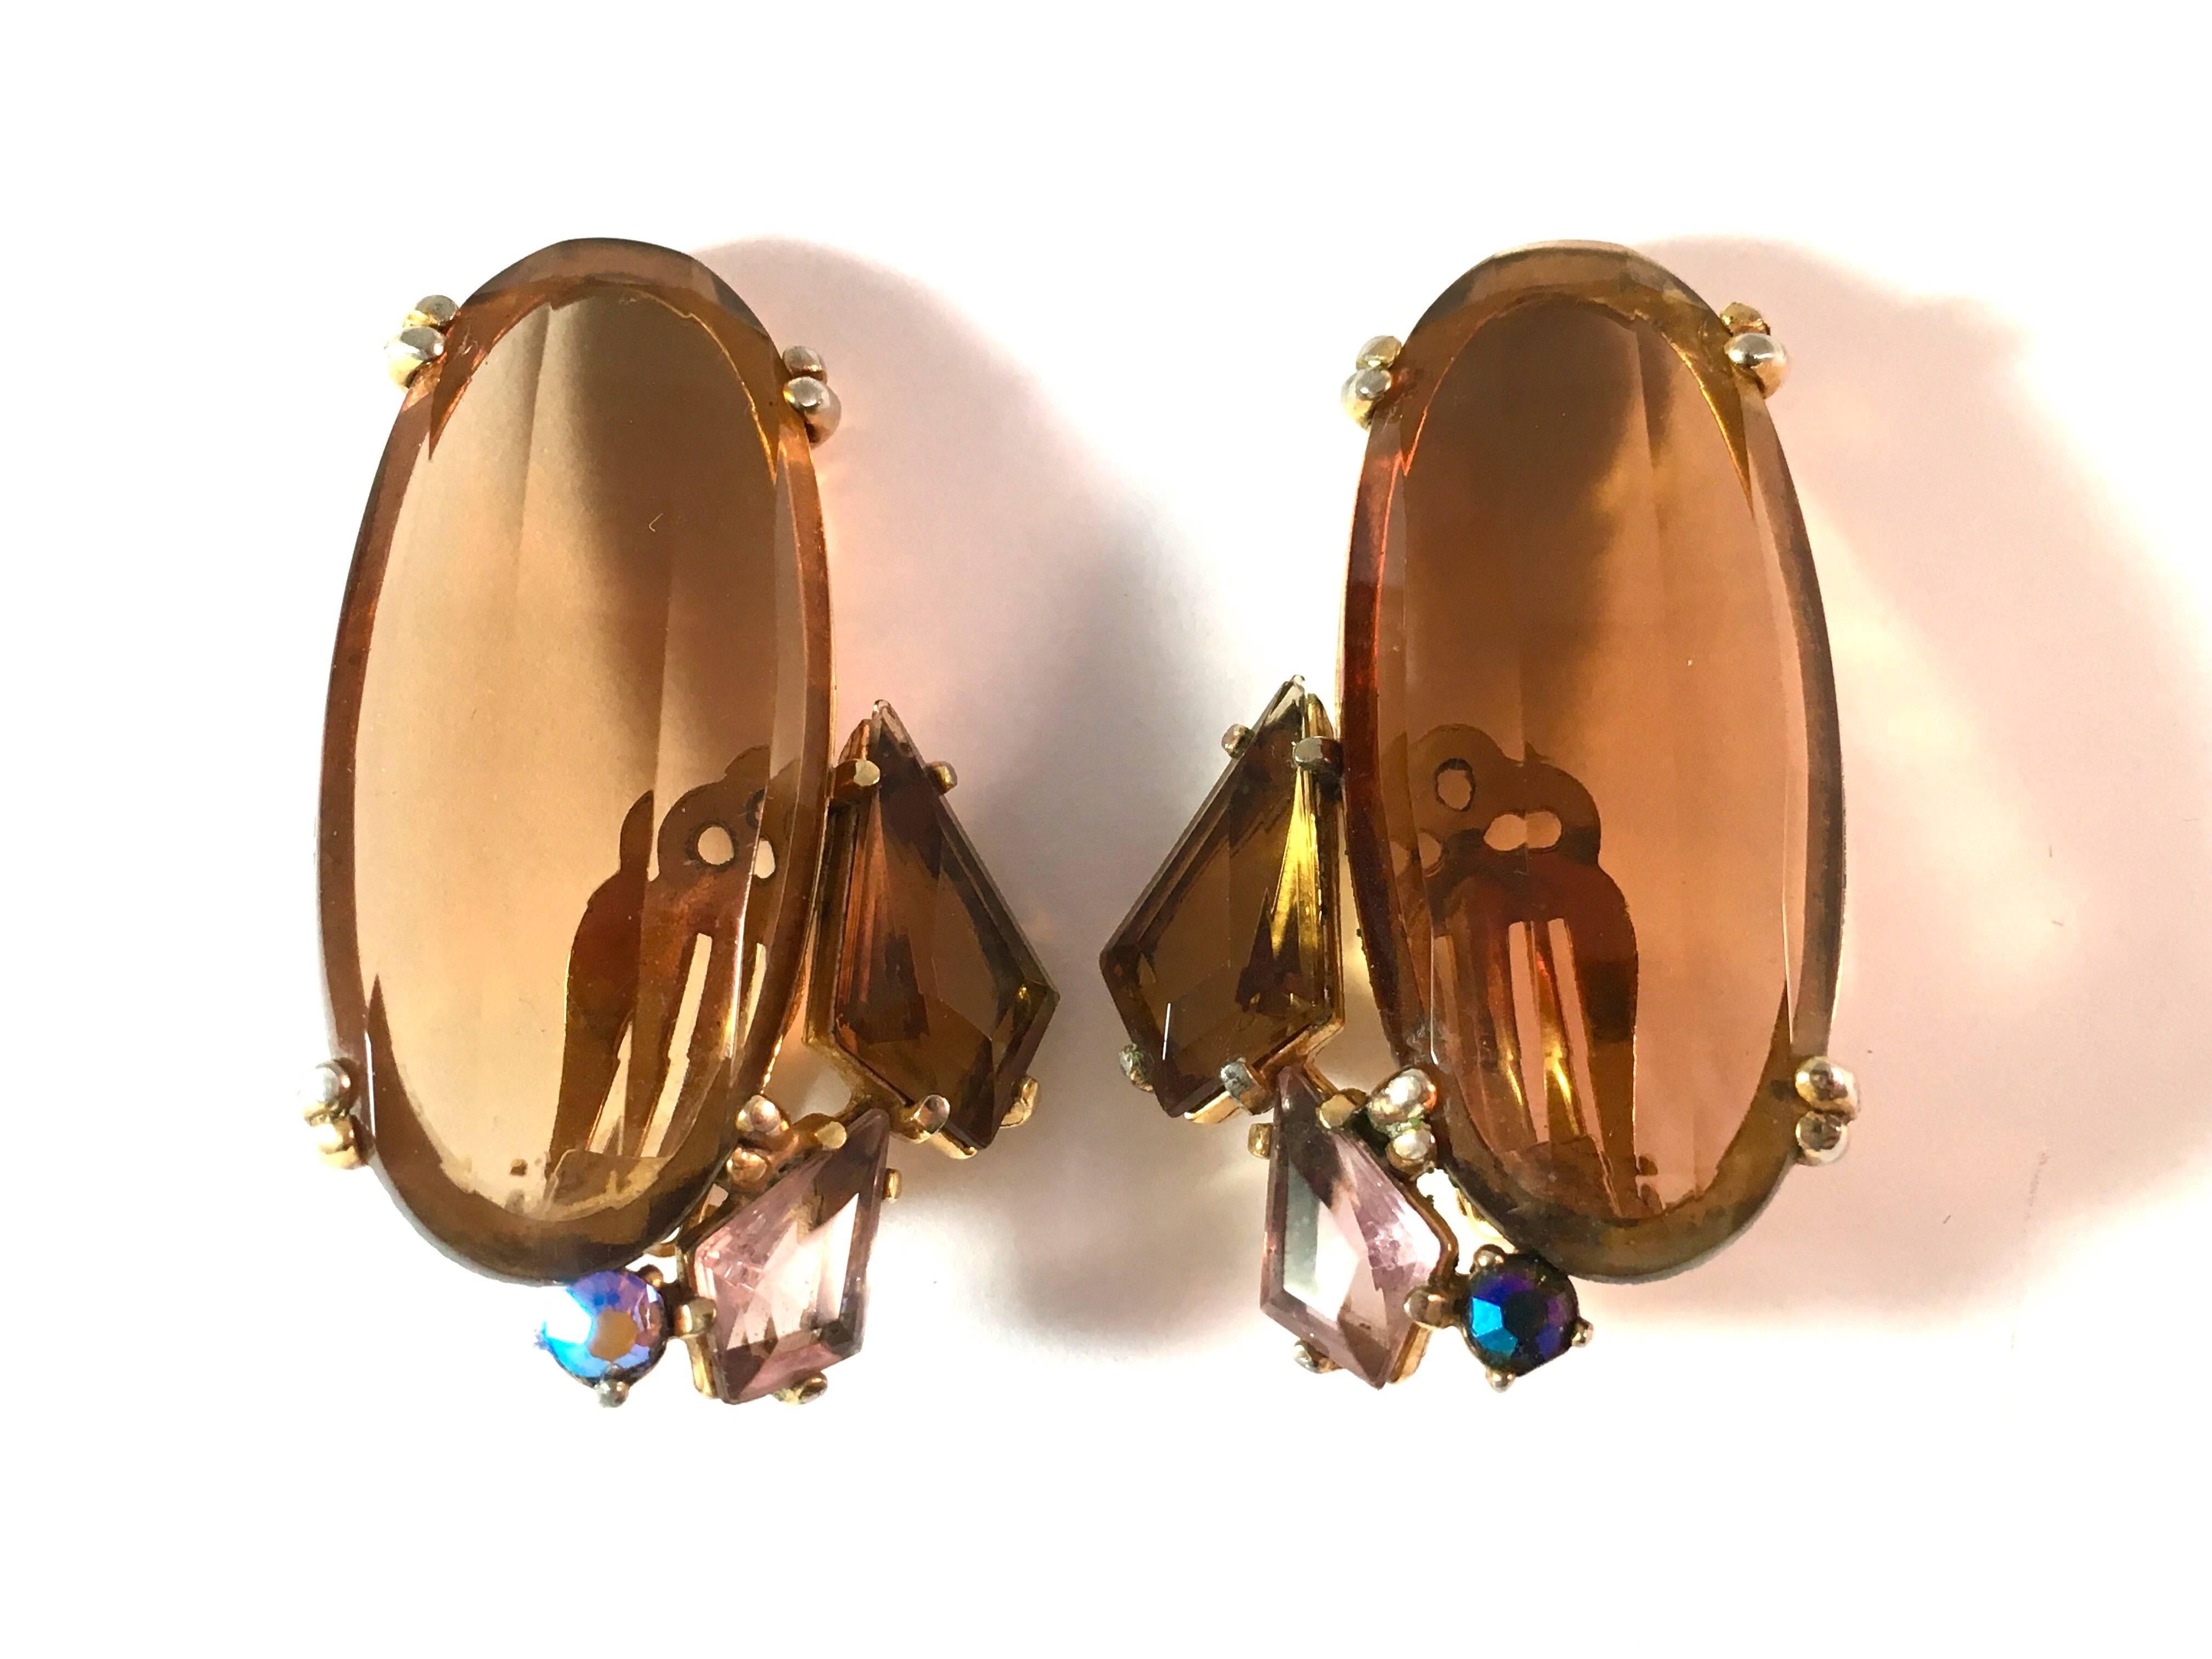 These huge Elsa Schiaparelli clip-on earrings are from the 1940s. Each earring is  made up of a large faceted light brown topaz glass stone set with two additional stones and an aurora borealis. The earrings have a gold-tone base metal. They are